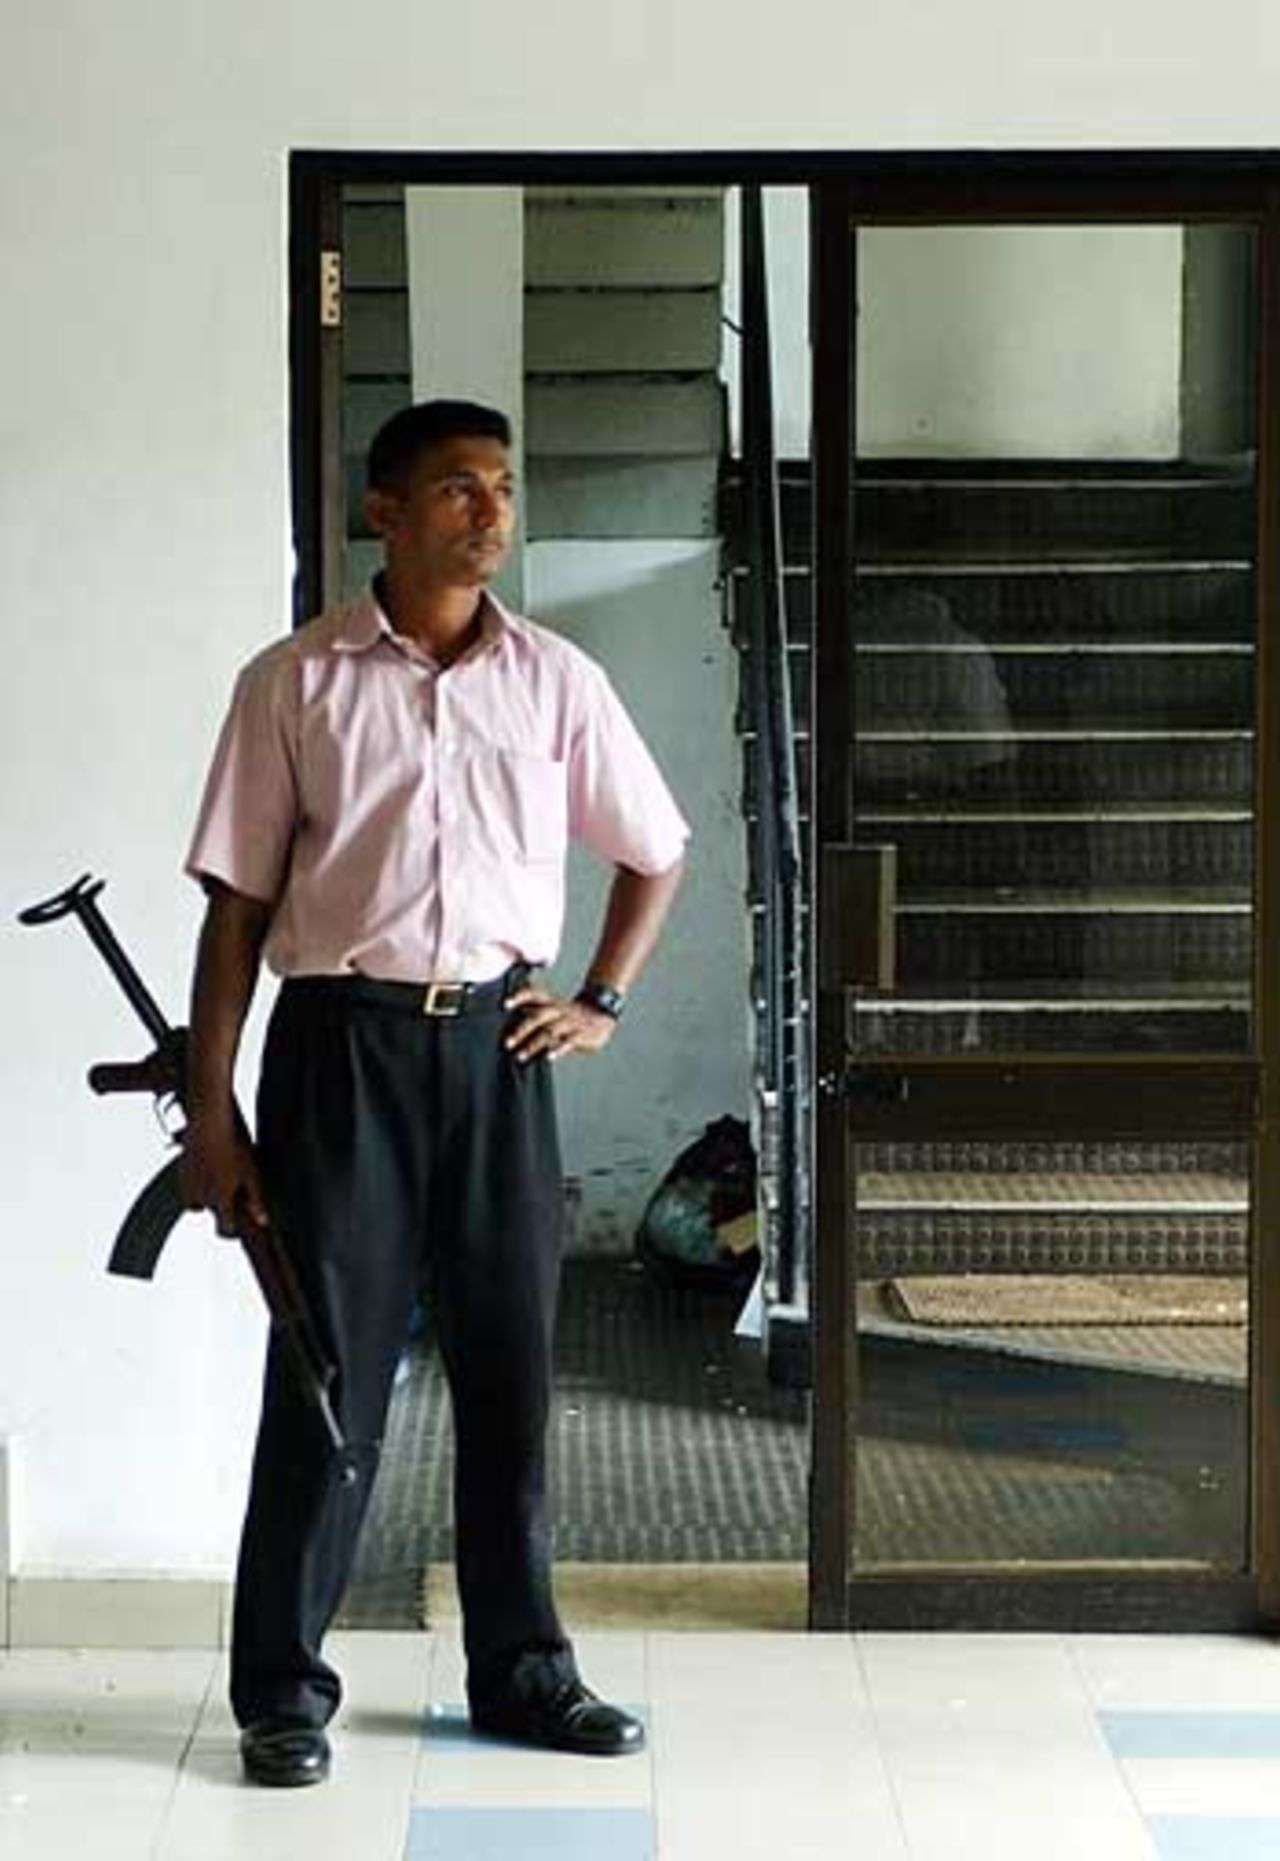 An armed plain-clothes police officer stands guard at the entrance to the Sri Lanka Cricket Board offices, Colombo, May 2